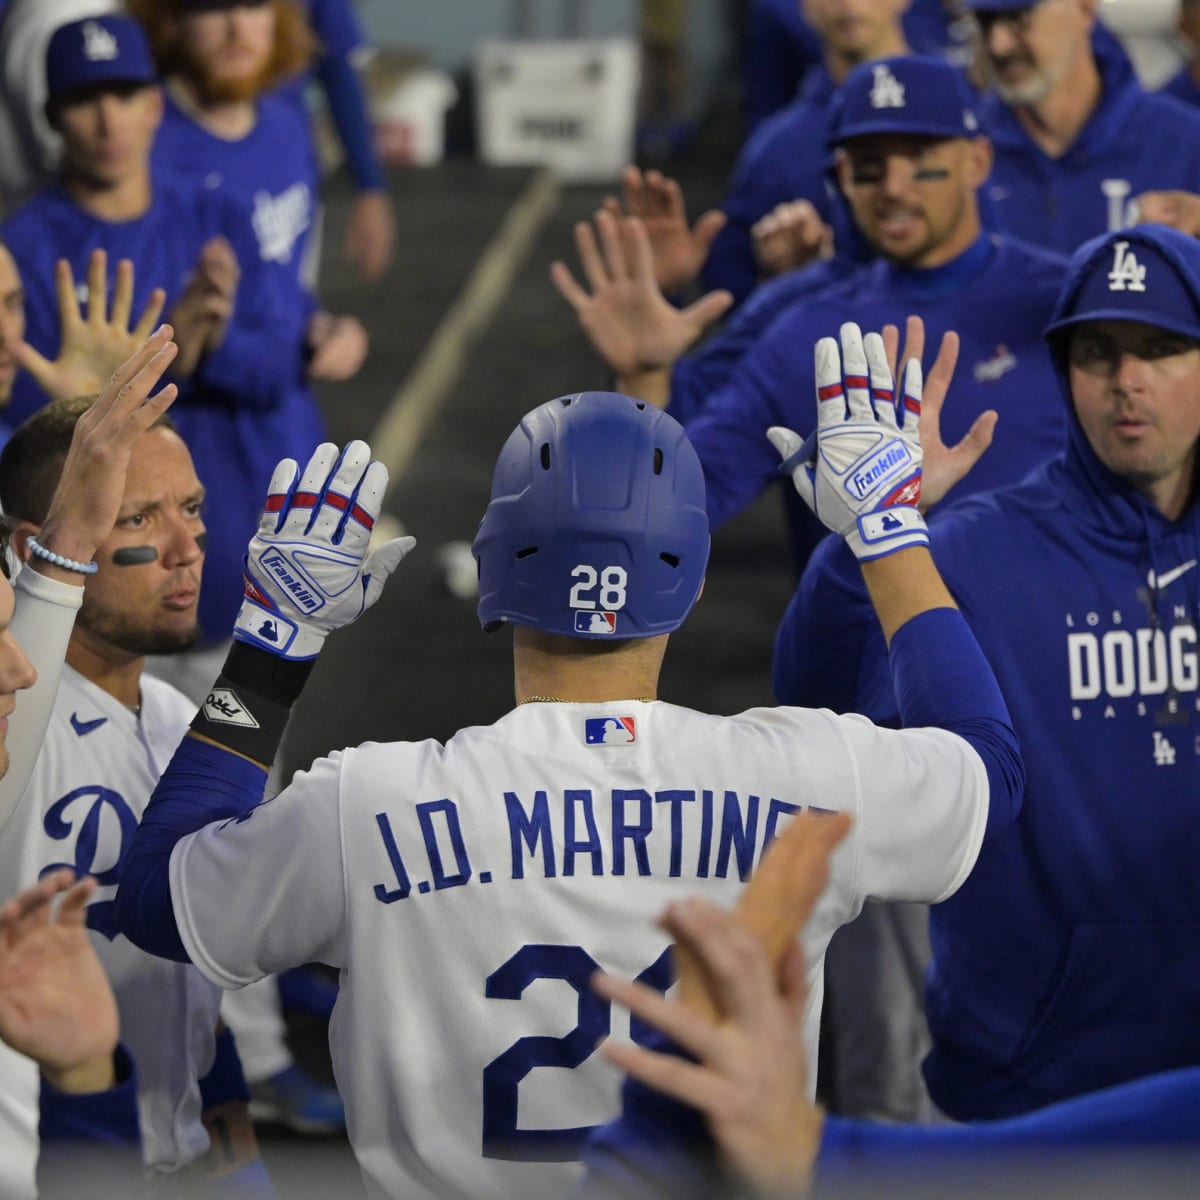 Dodgers Announce Opening Day Roster, and Thoughts Going Into